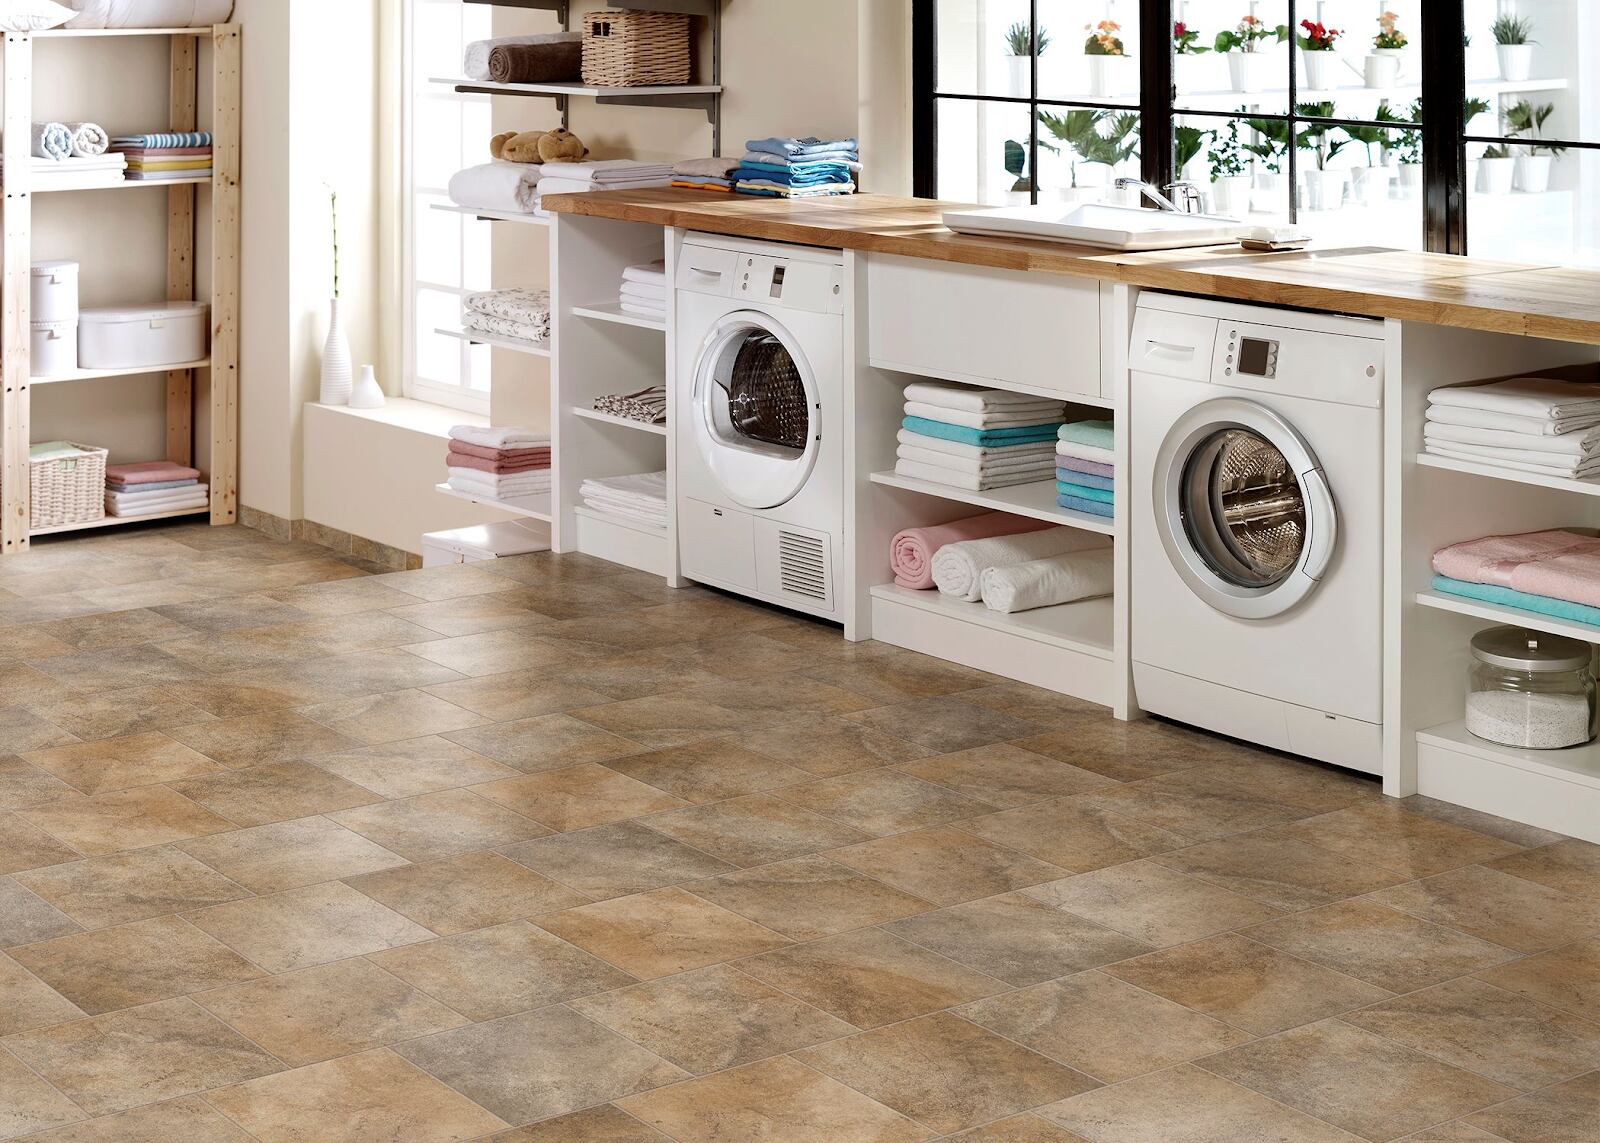 How To Tile Laundry Room Floor